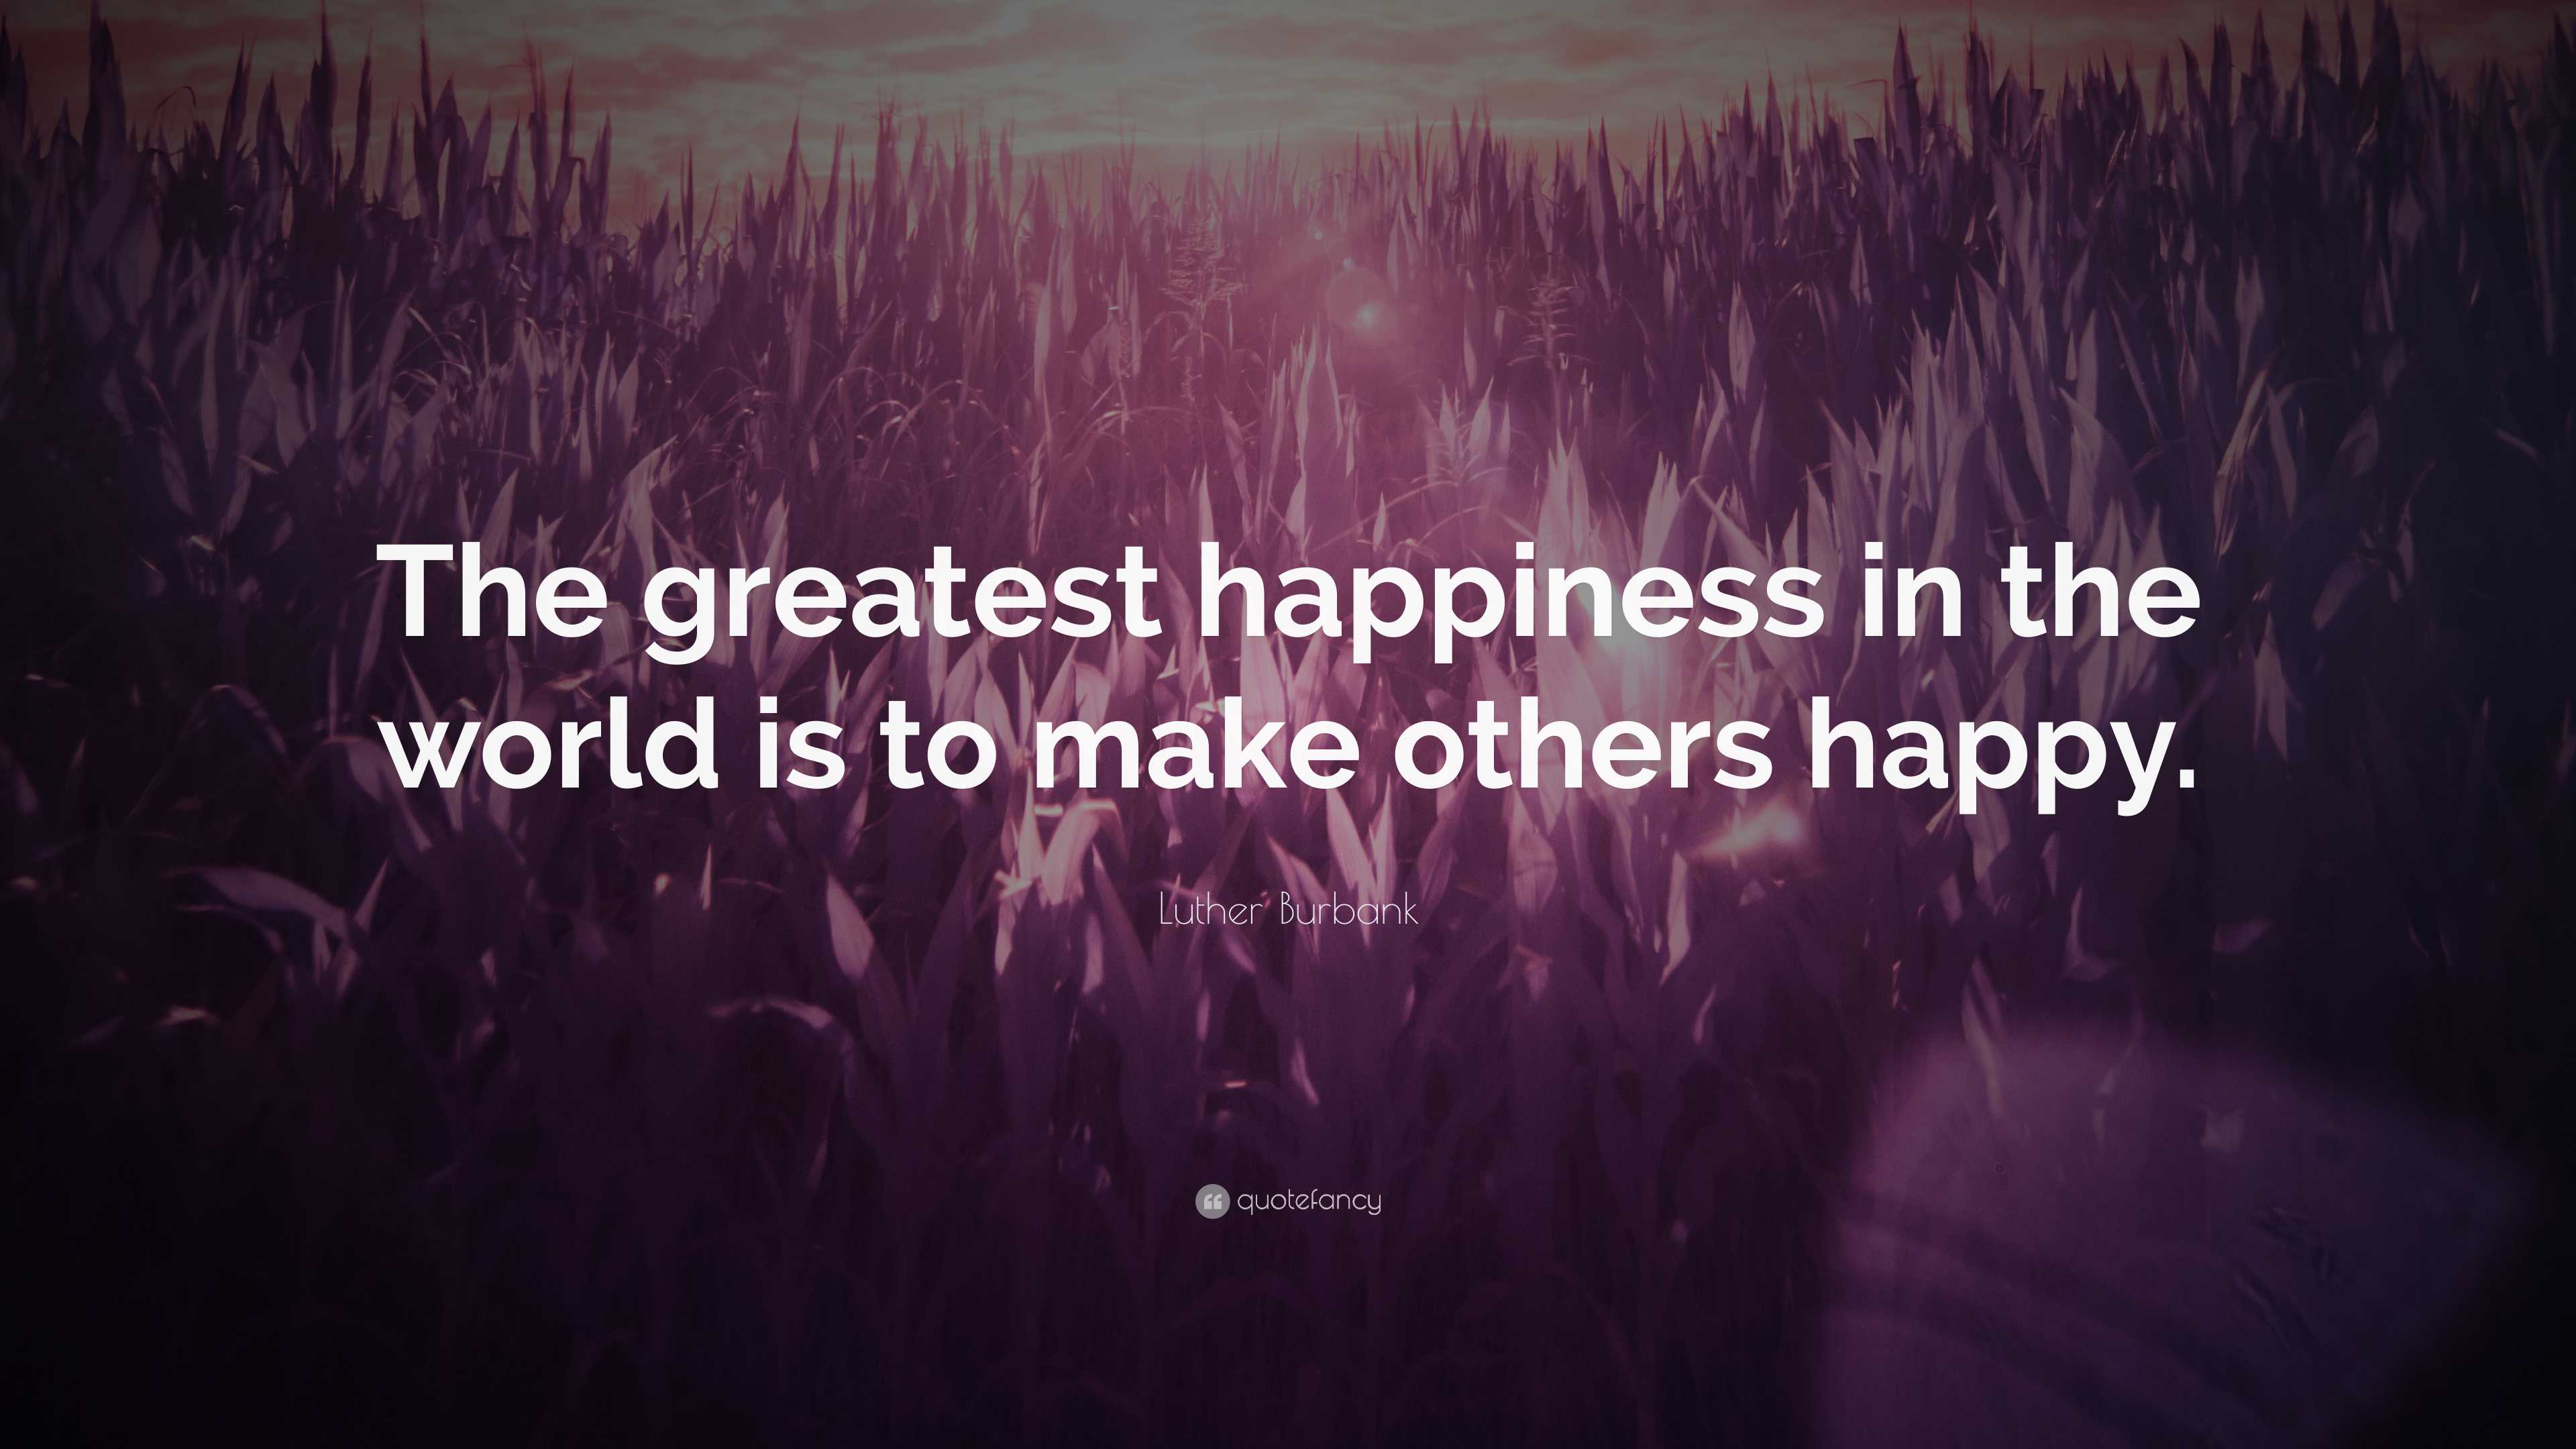 Luther Burbank Quote: “The greatest happiness in the world is to